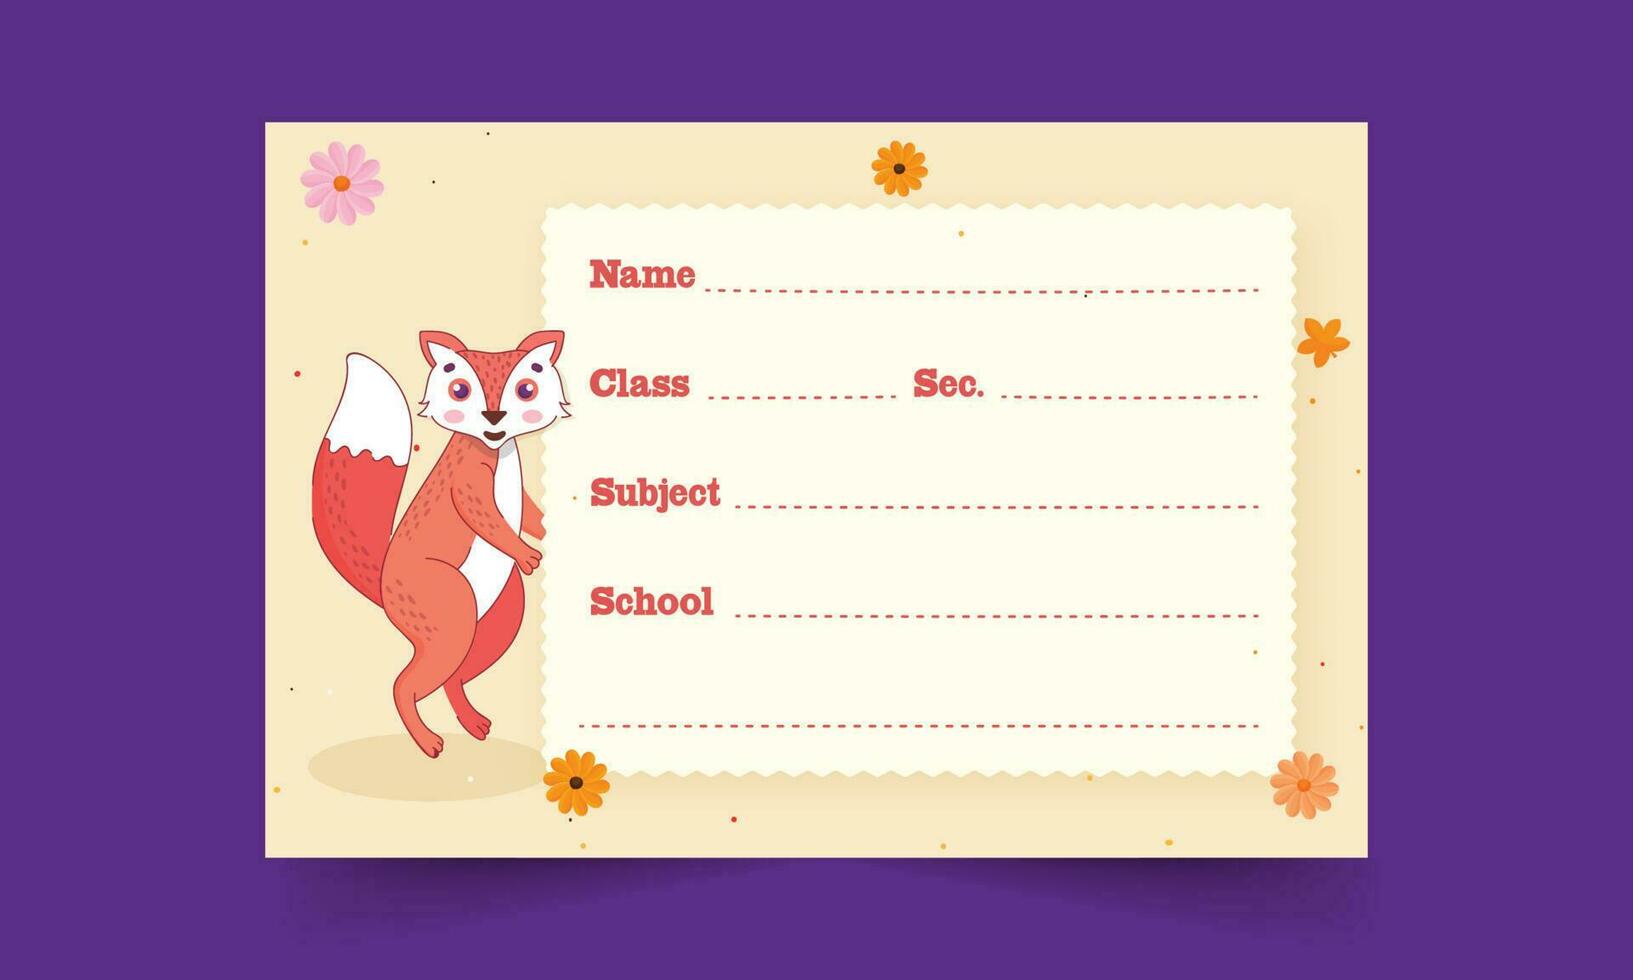 Cartoon Fox Animal With Flower Decorative Notebook Label Or Name Tag On Purple Background. vector